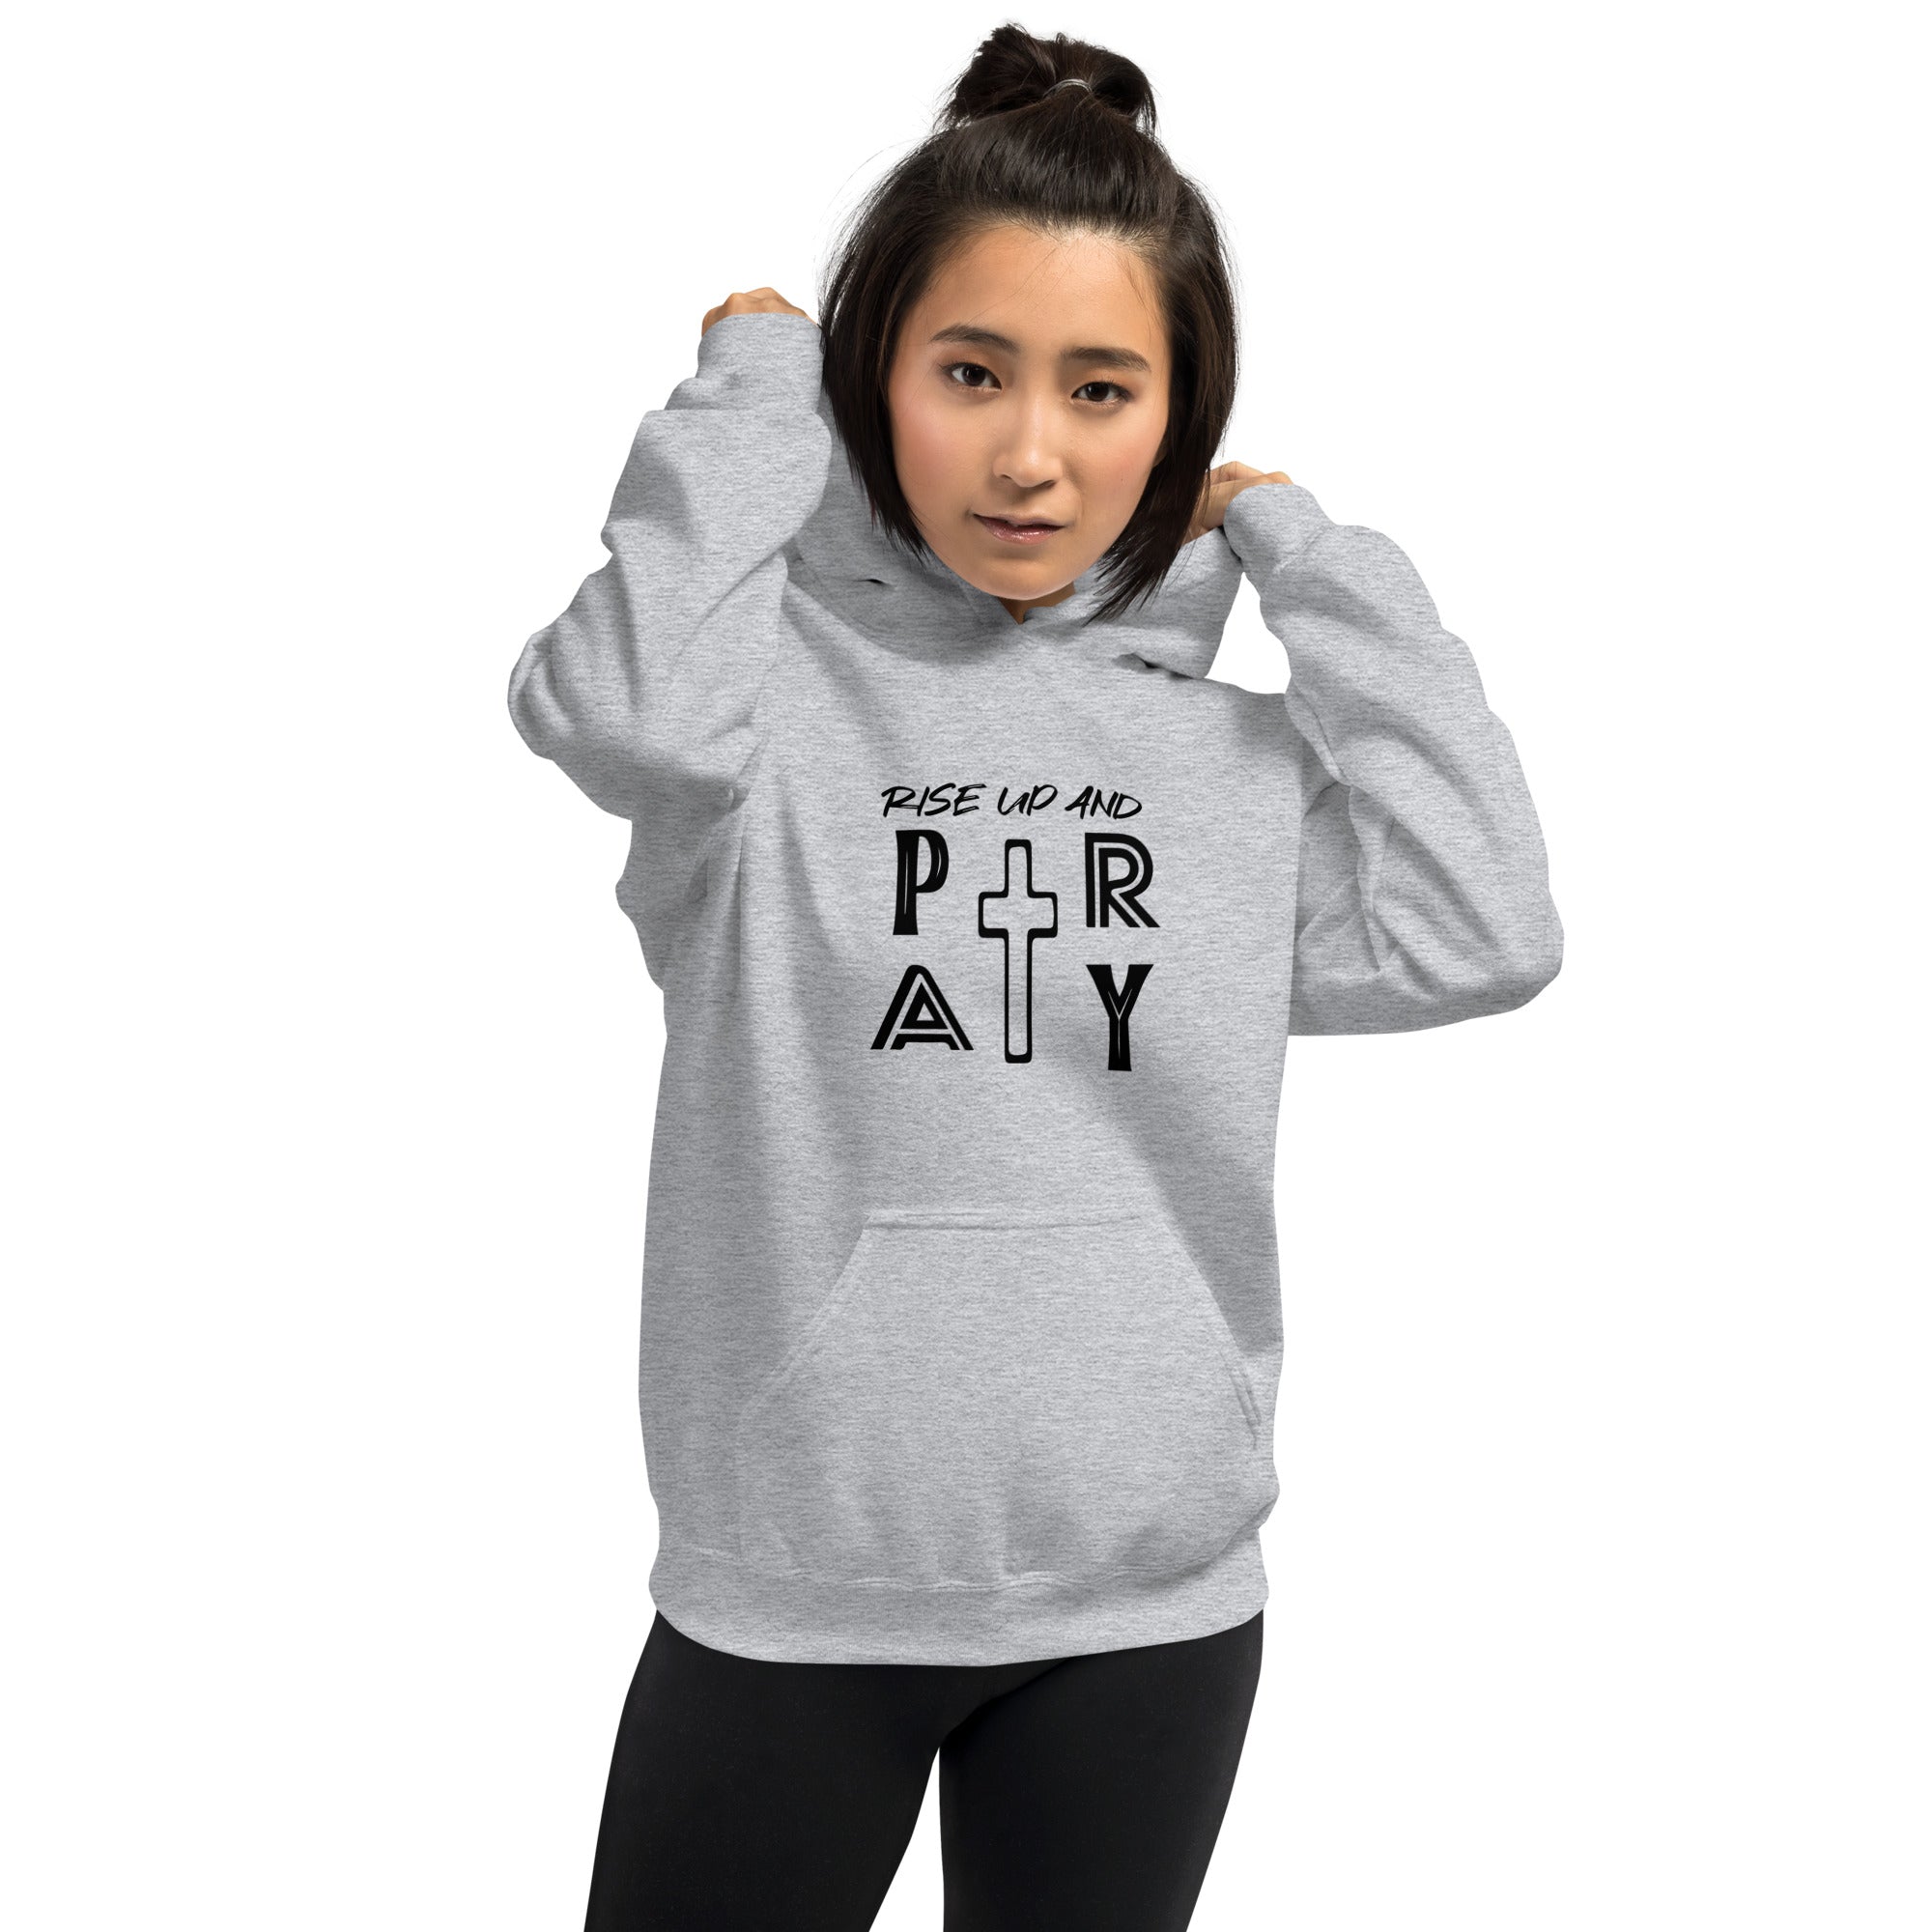 Rise Up And Pray - Unisex Hoodie